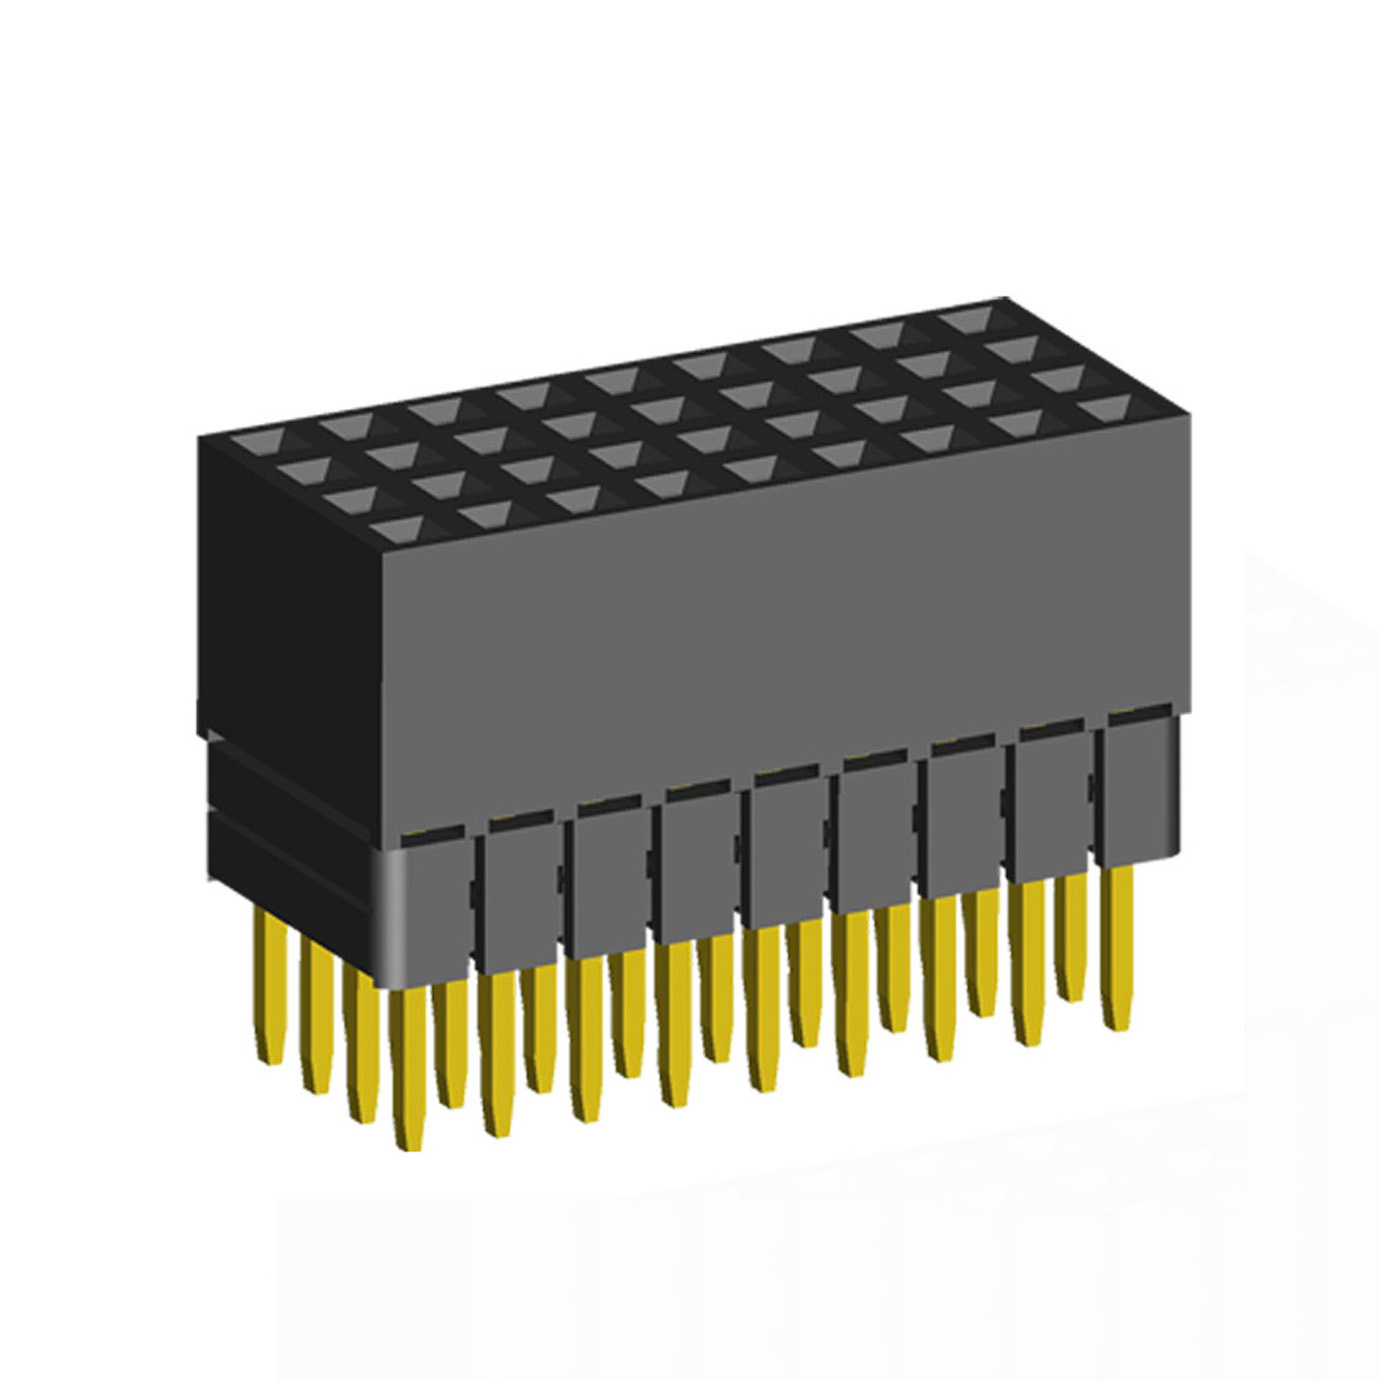 1999SDI-XXXG-2B series, four-row sockets straight to the Board for mounting holes, pitch 2,0x2,0 mm, 4x40 pins